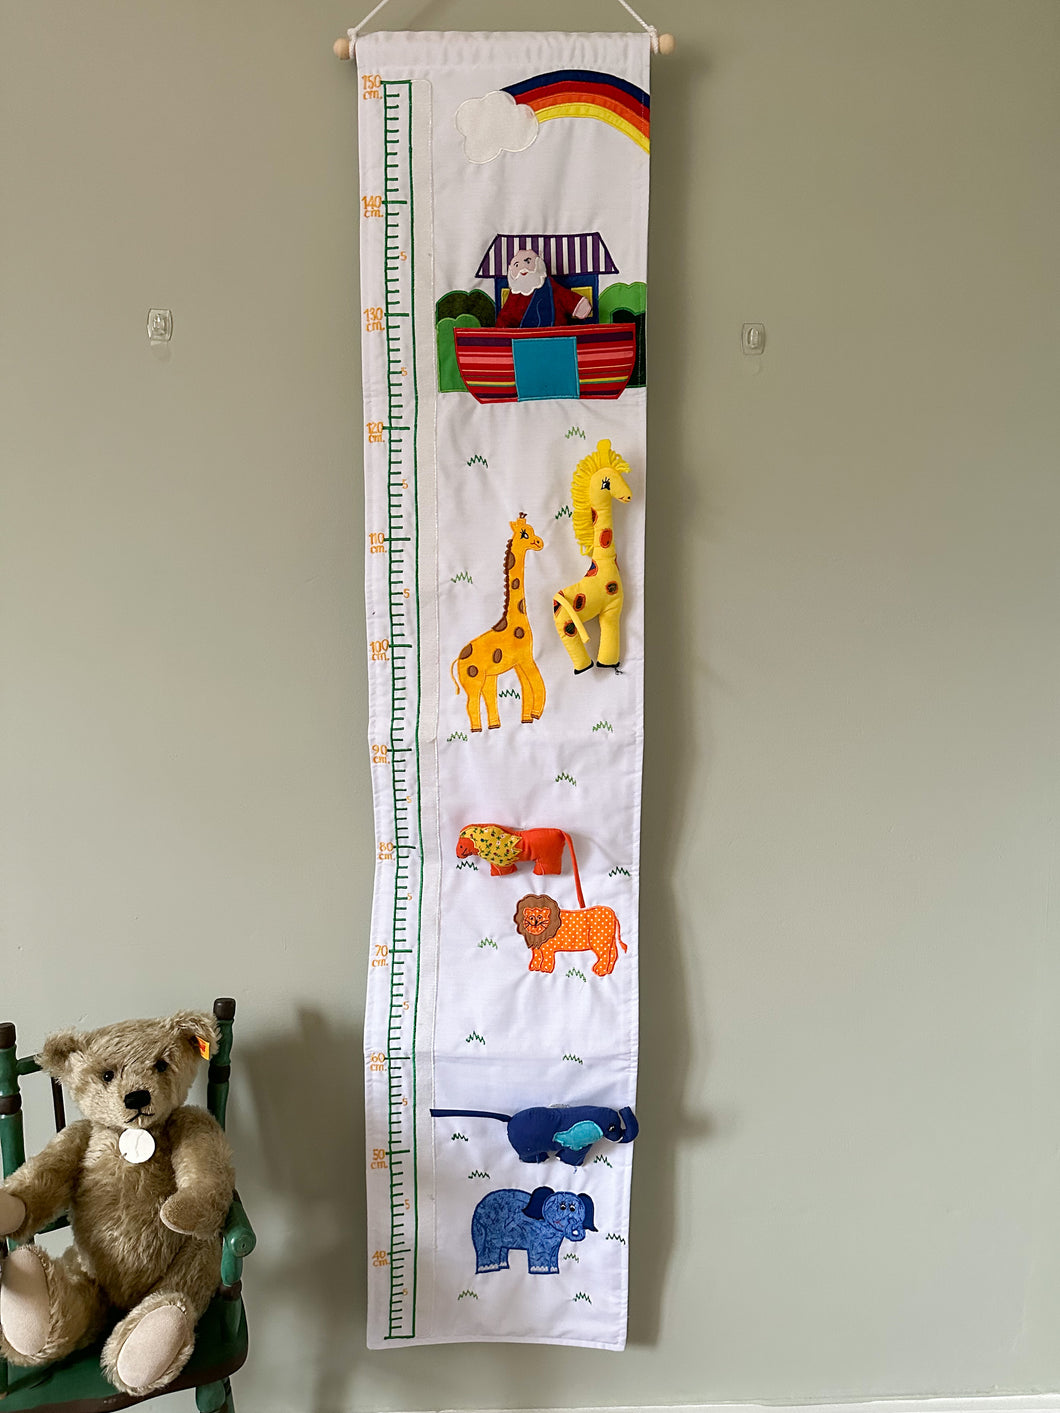 Vintage Noah’s Ark fabric height chart / growth chart / measuring stick - Moppet